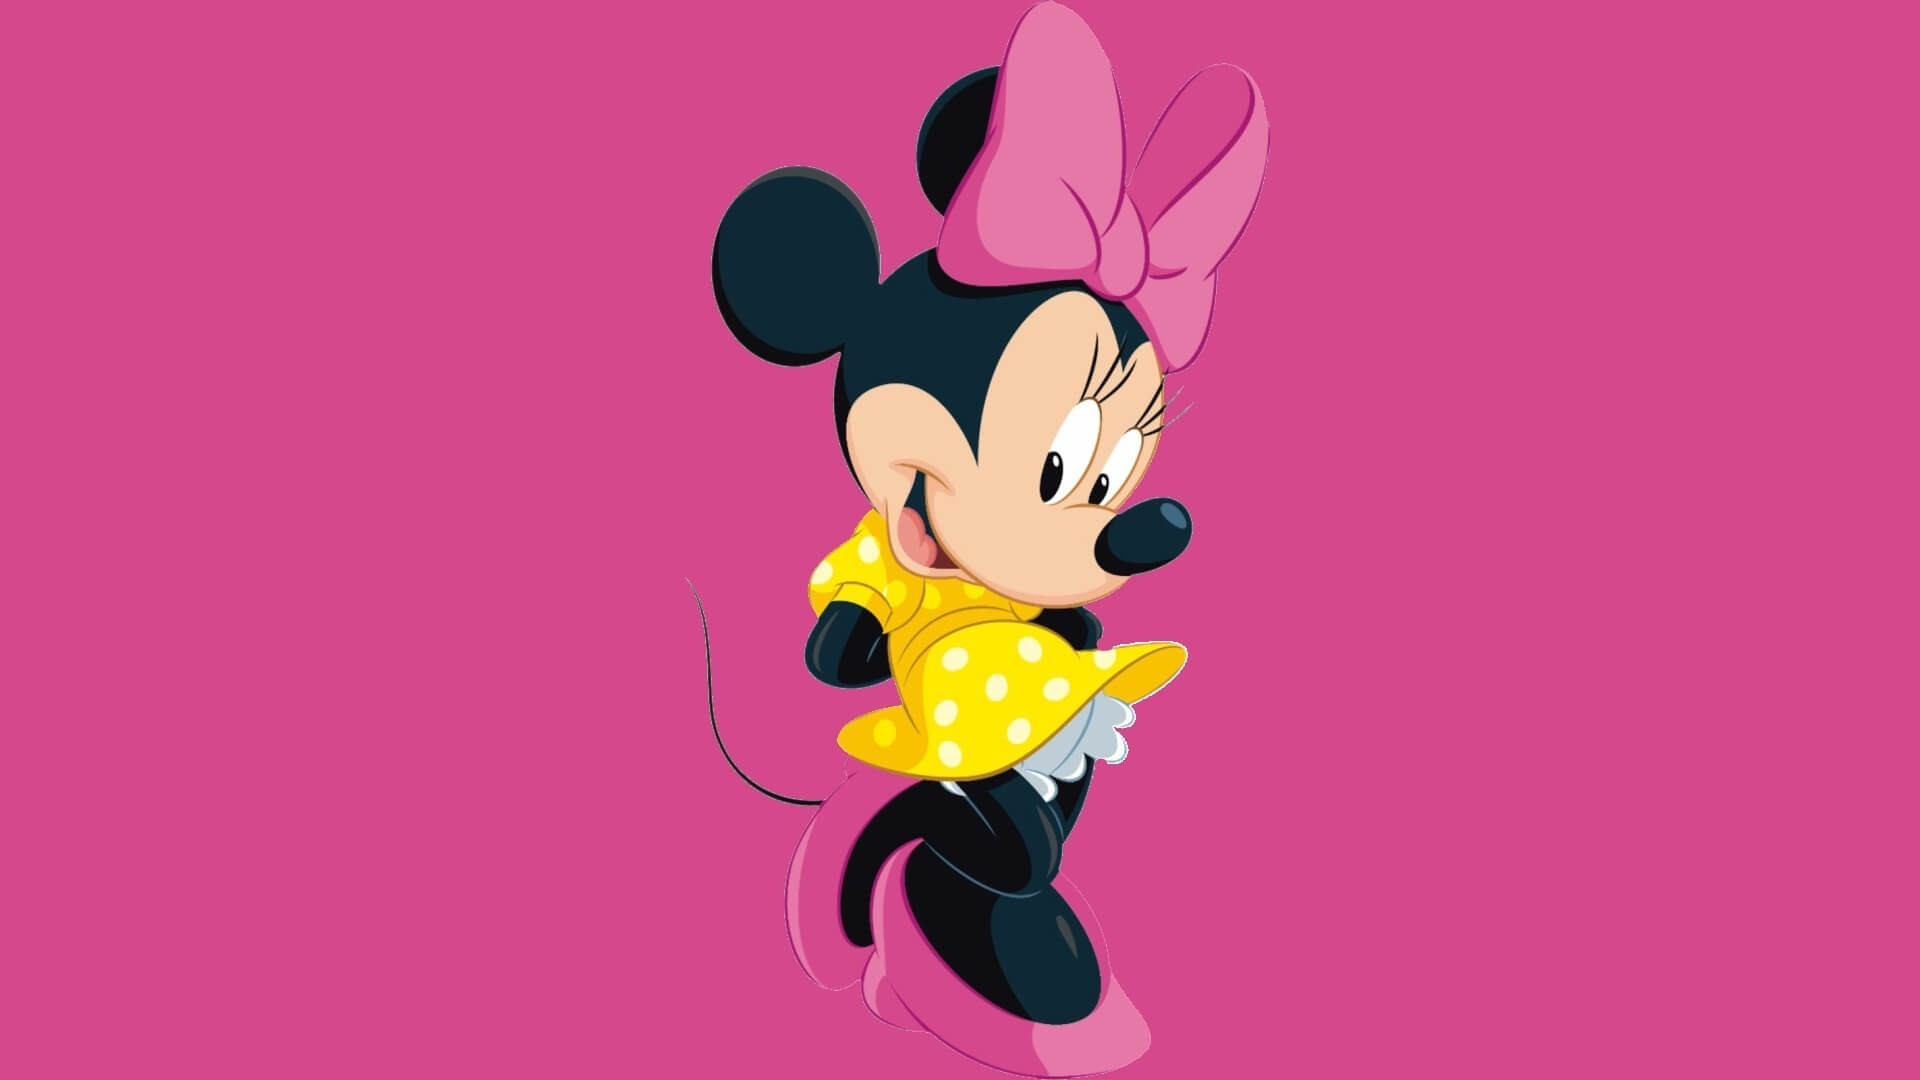 Minnie mouse 1080P 2K 4K 5K HD wallpapers free download  Wallpaper Flare